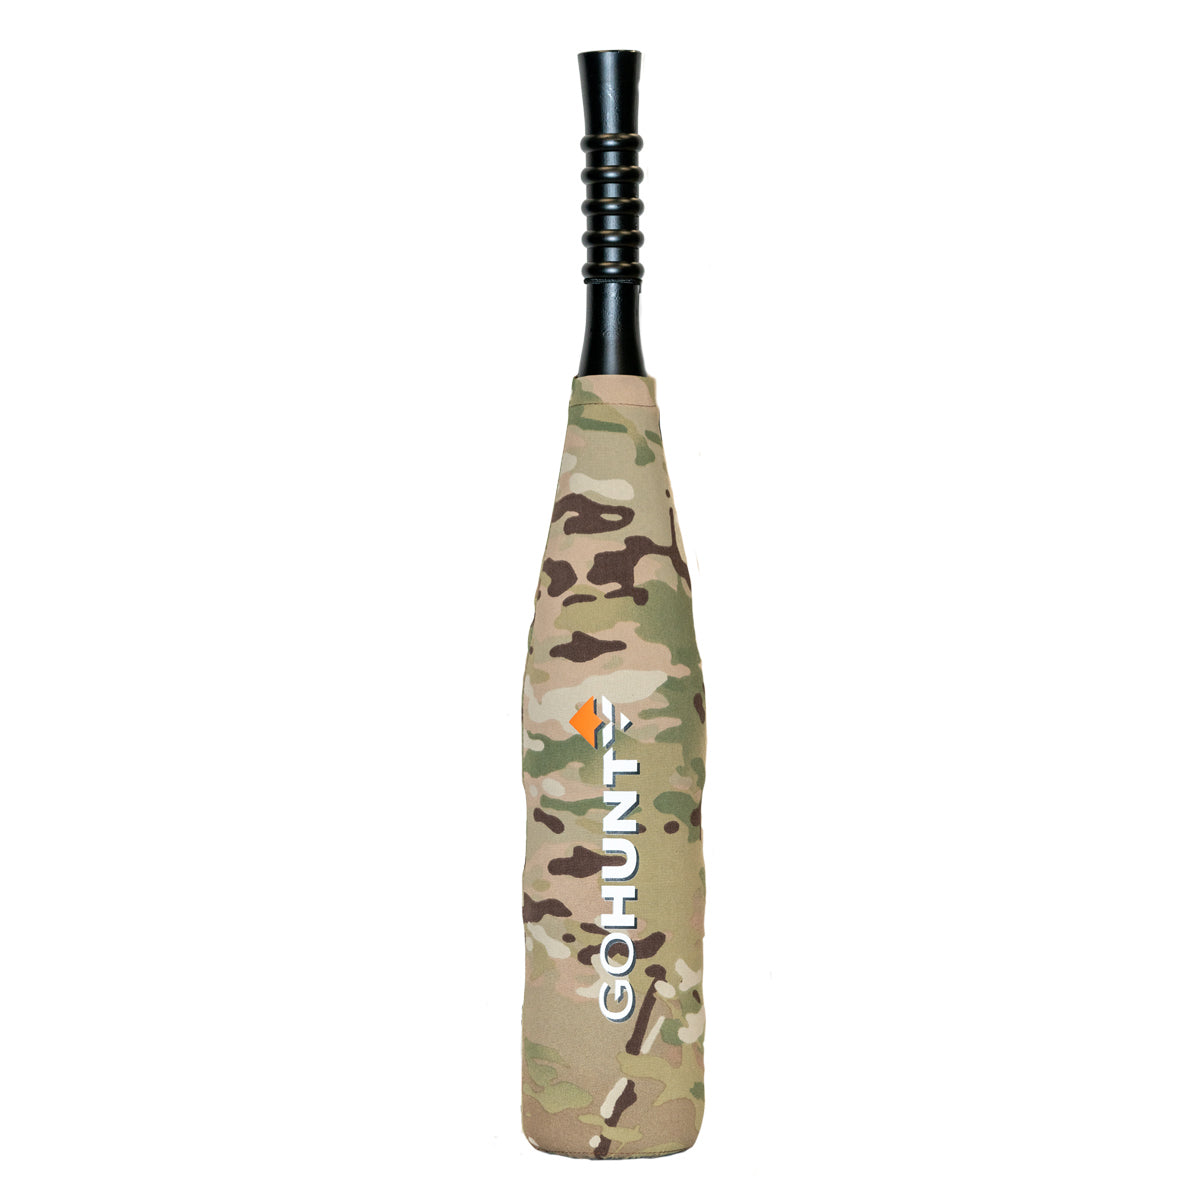 GOHUNT Ripper 2.0 Bugle Tube by Phelps Game Calls